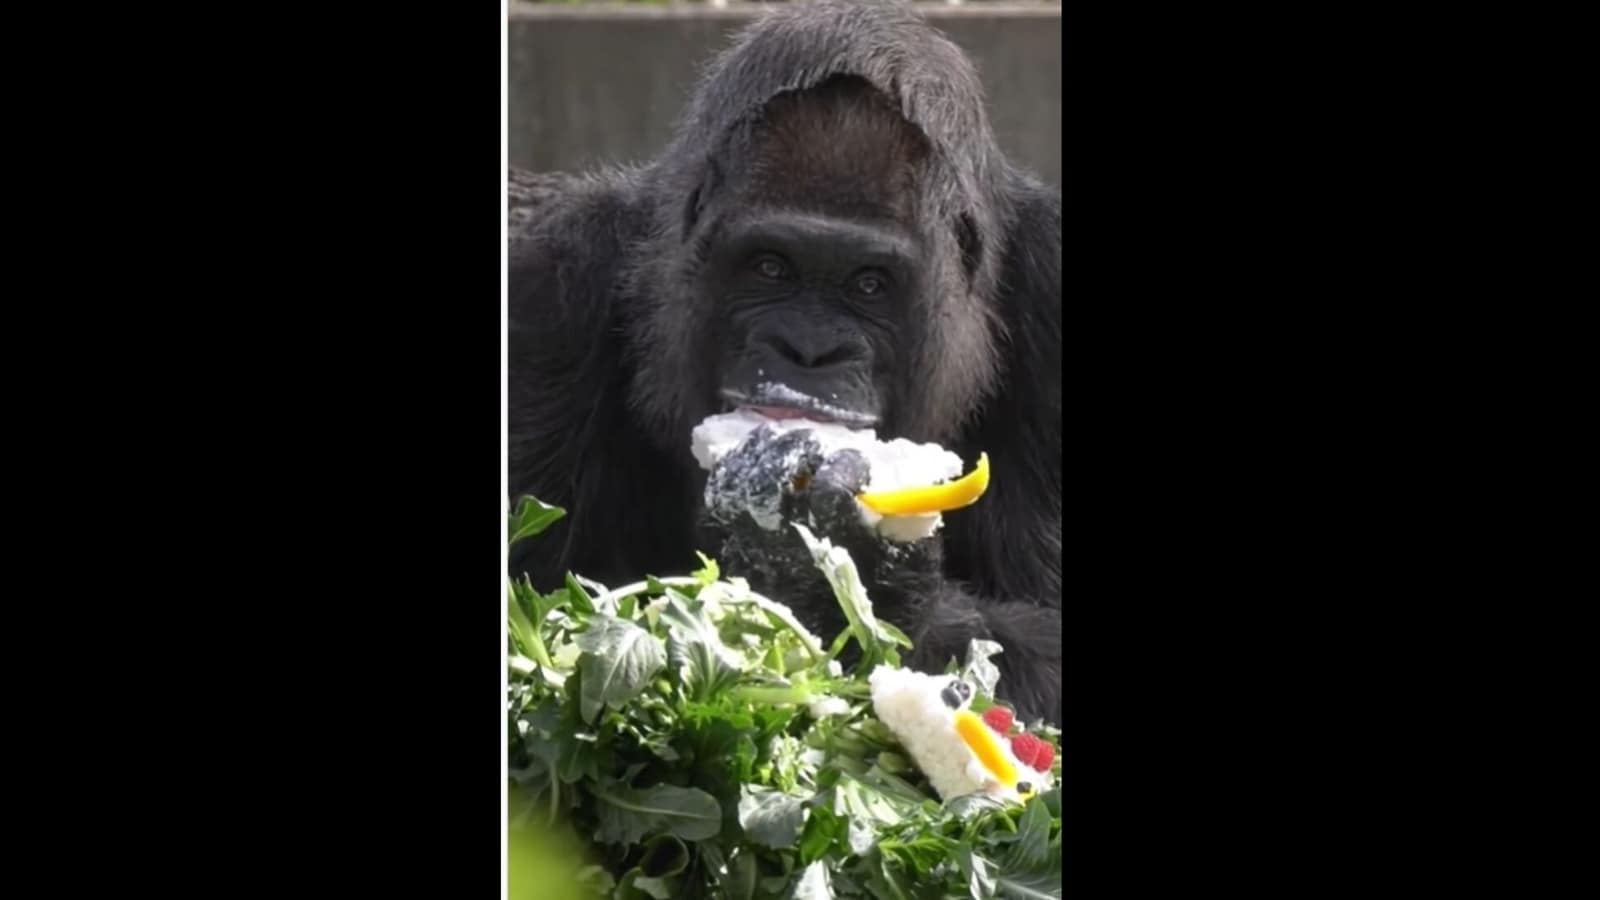 World’s oldest living gorilla celebrates her 65th birthday at the Berlin Zoo